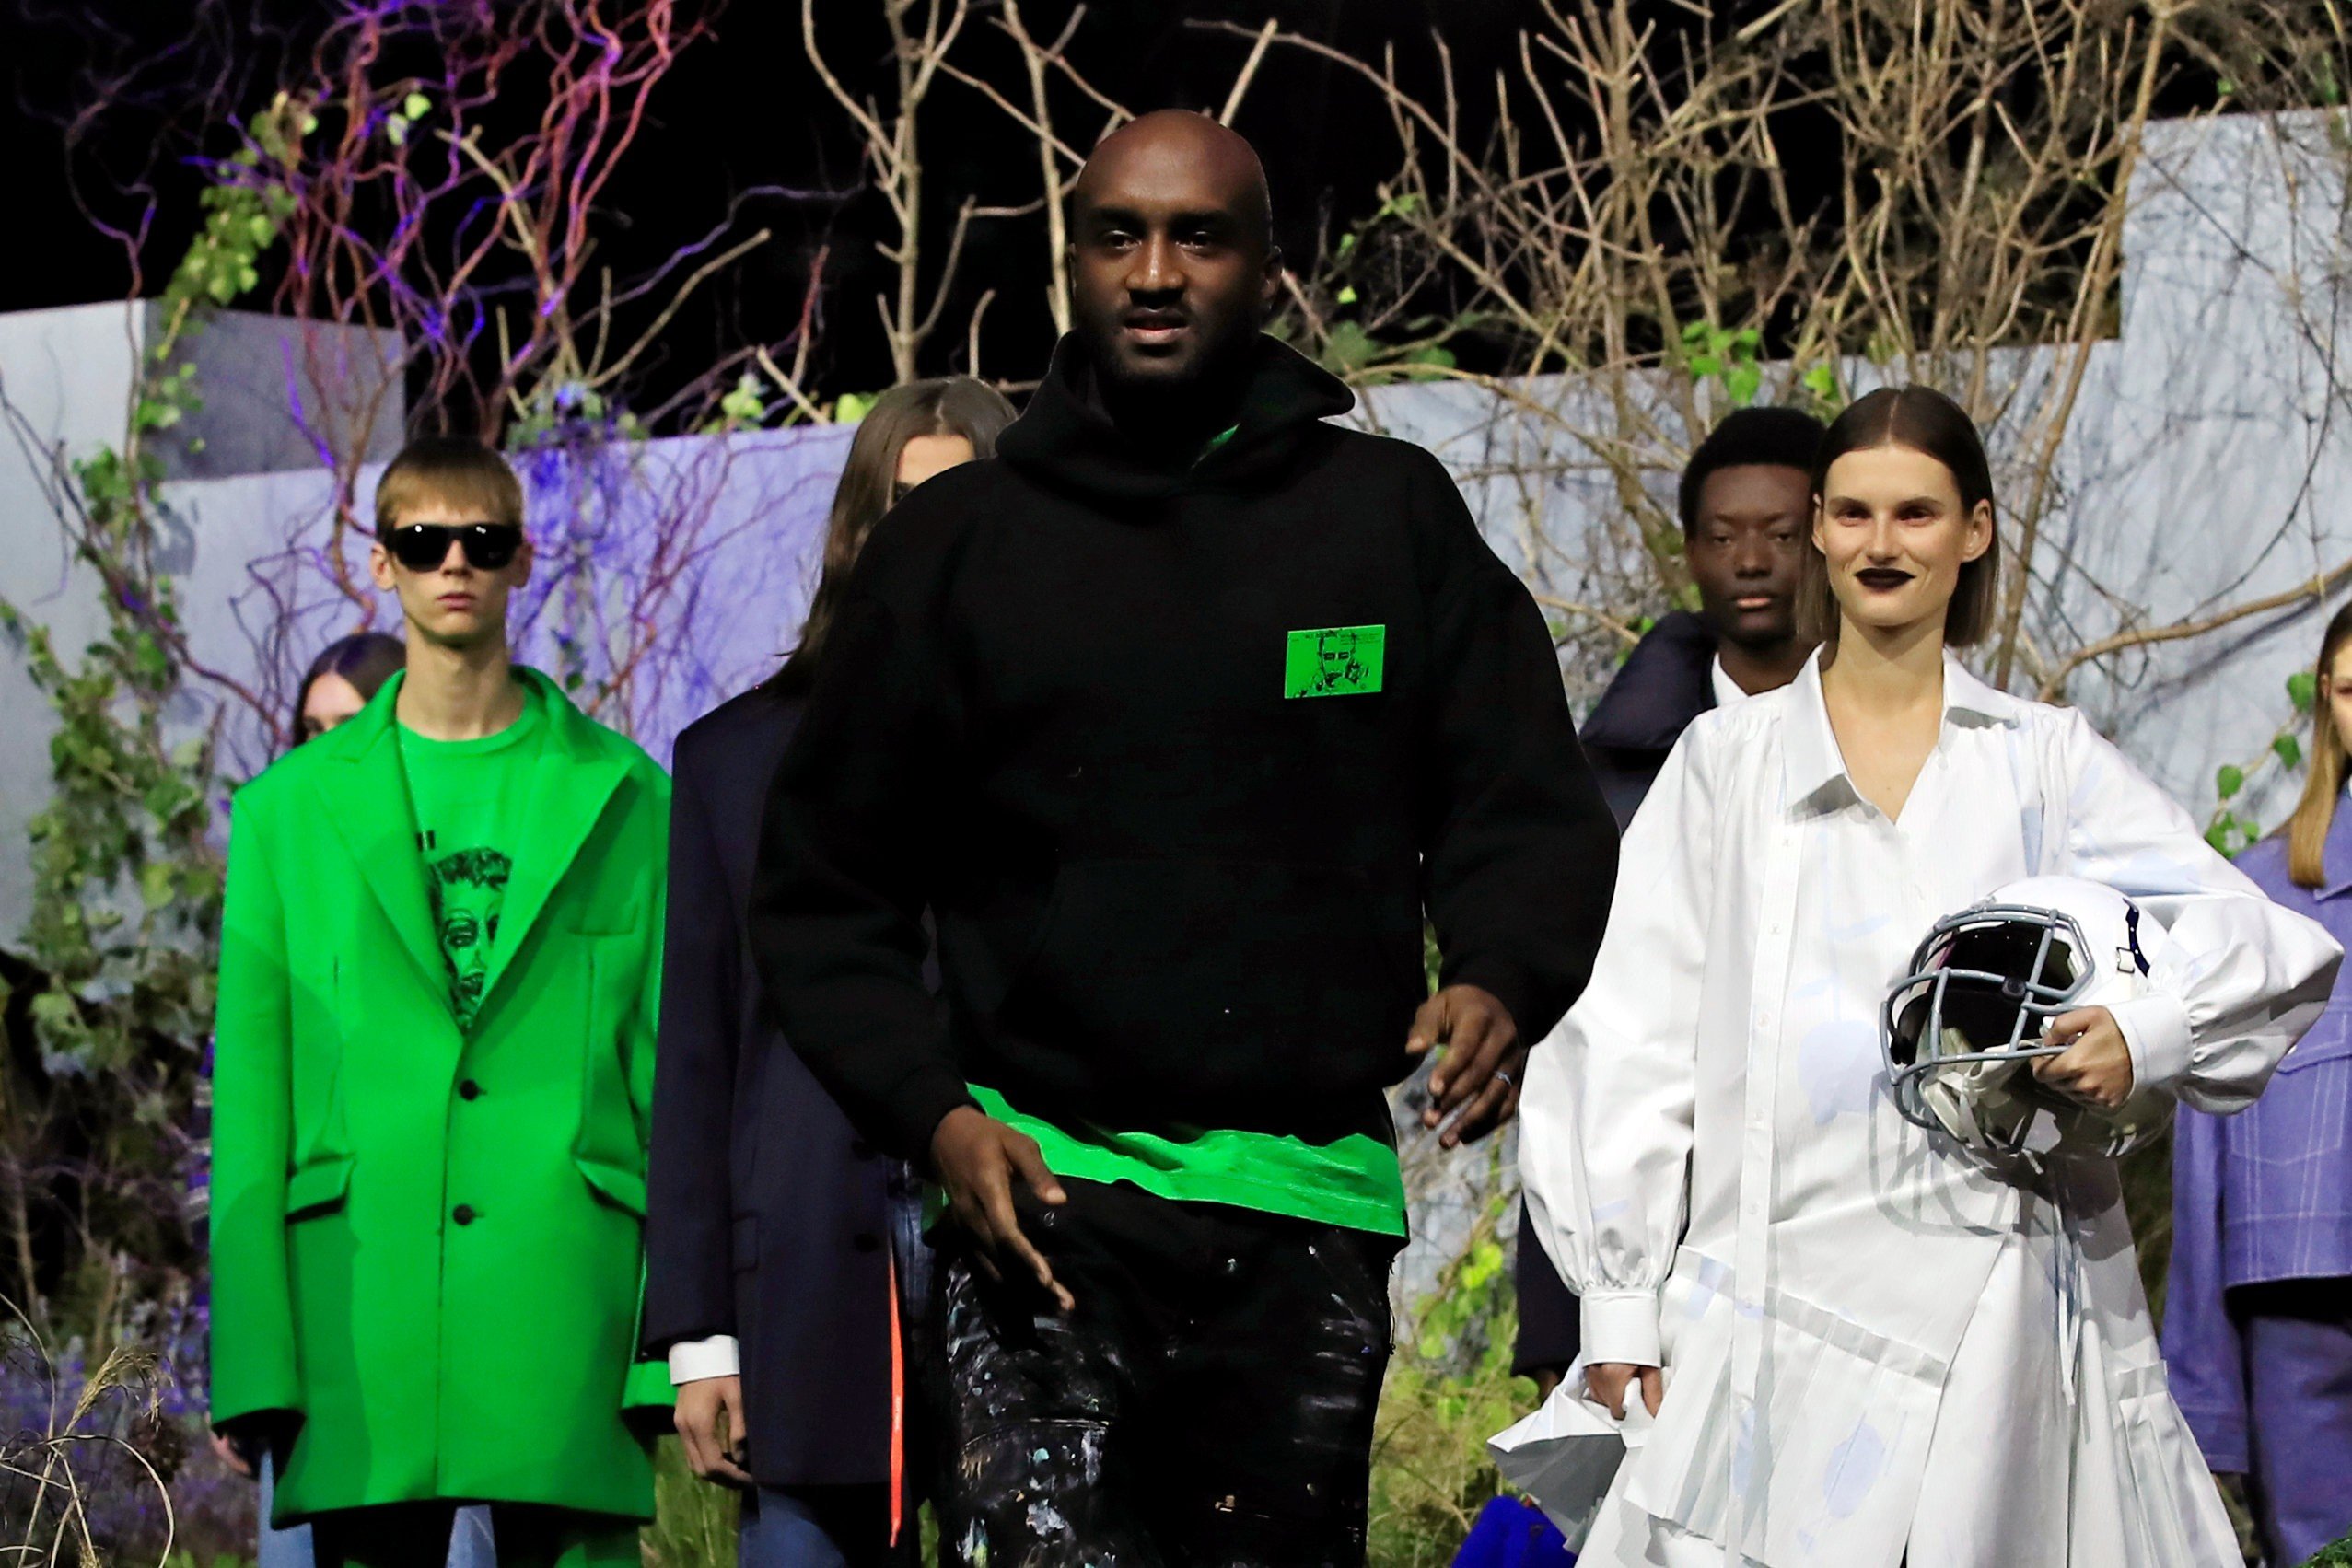 Louis Vuitton's Virgil Abloh makes suit and tie the stuff of streetwear  with edgy Off-White Paris show